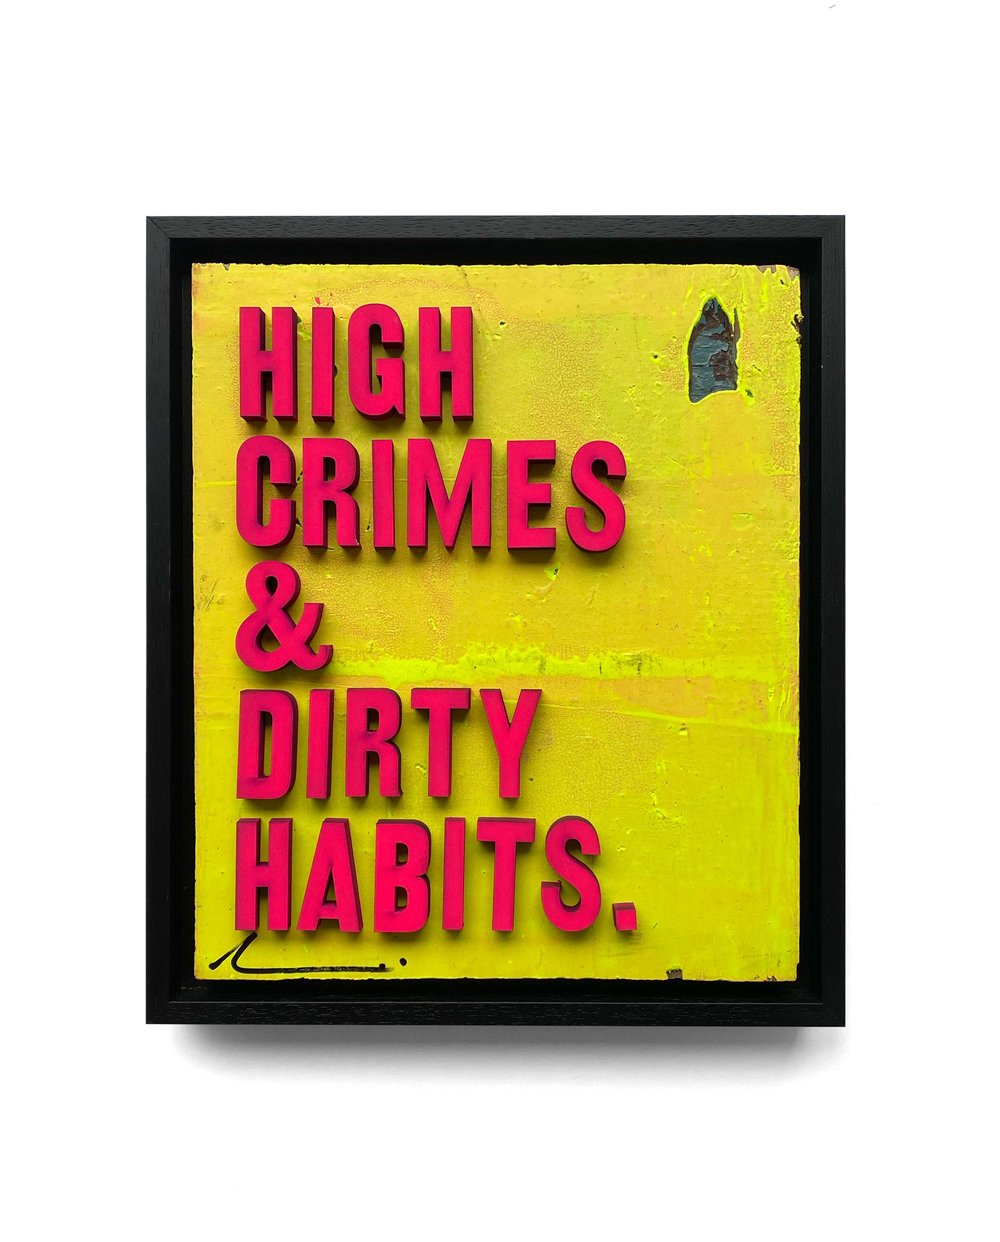 Image of 'High crimes and dirty habits.' by Hackney Dave